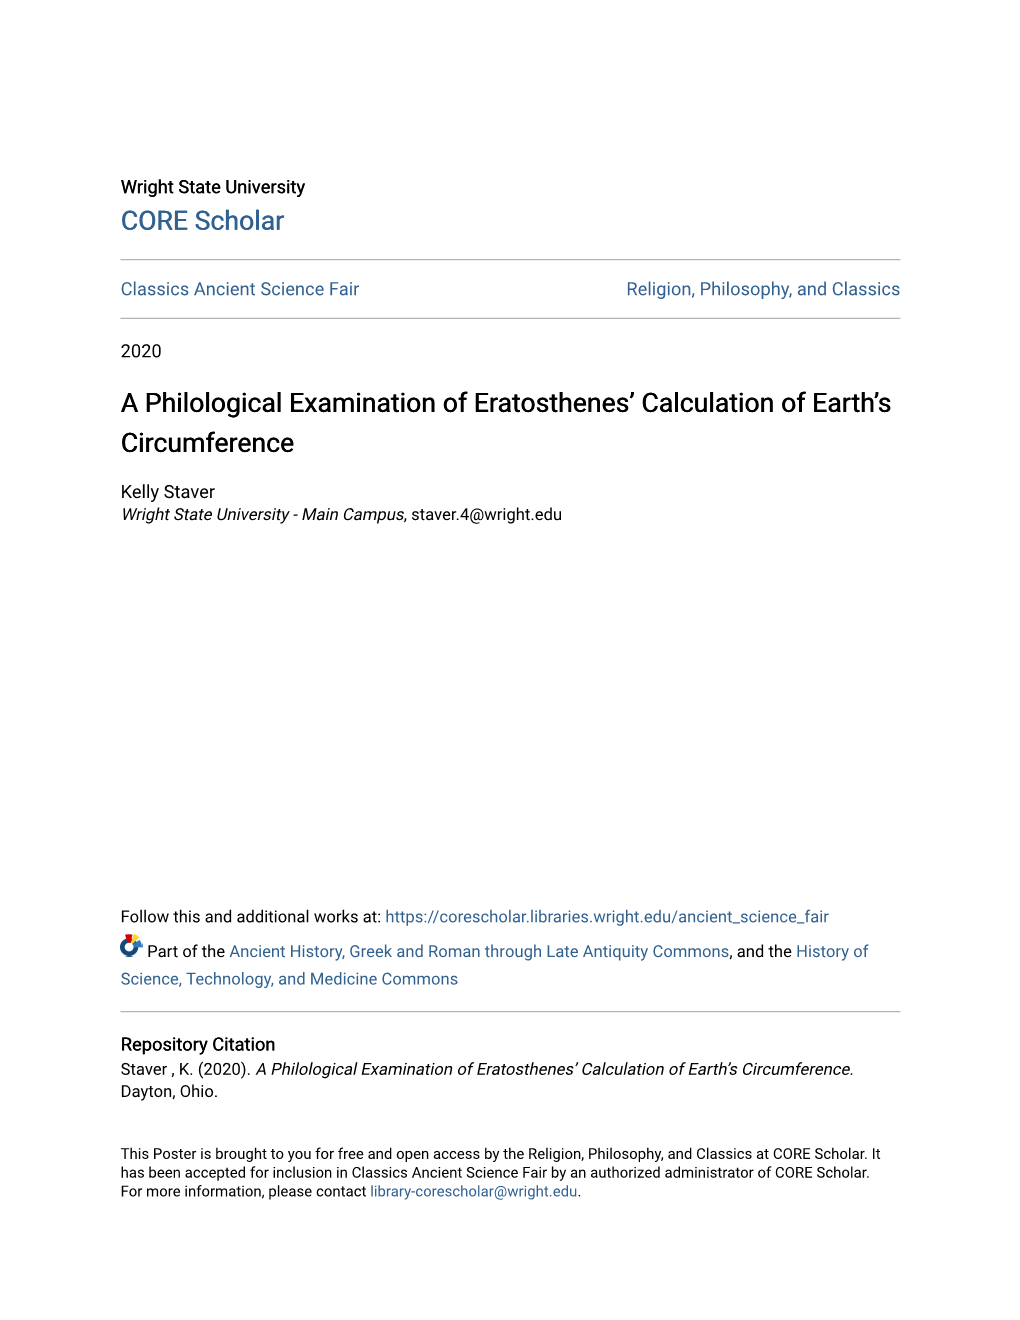 A Philological Examination of Eratosthenes' Calculation of Earth's